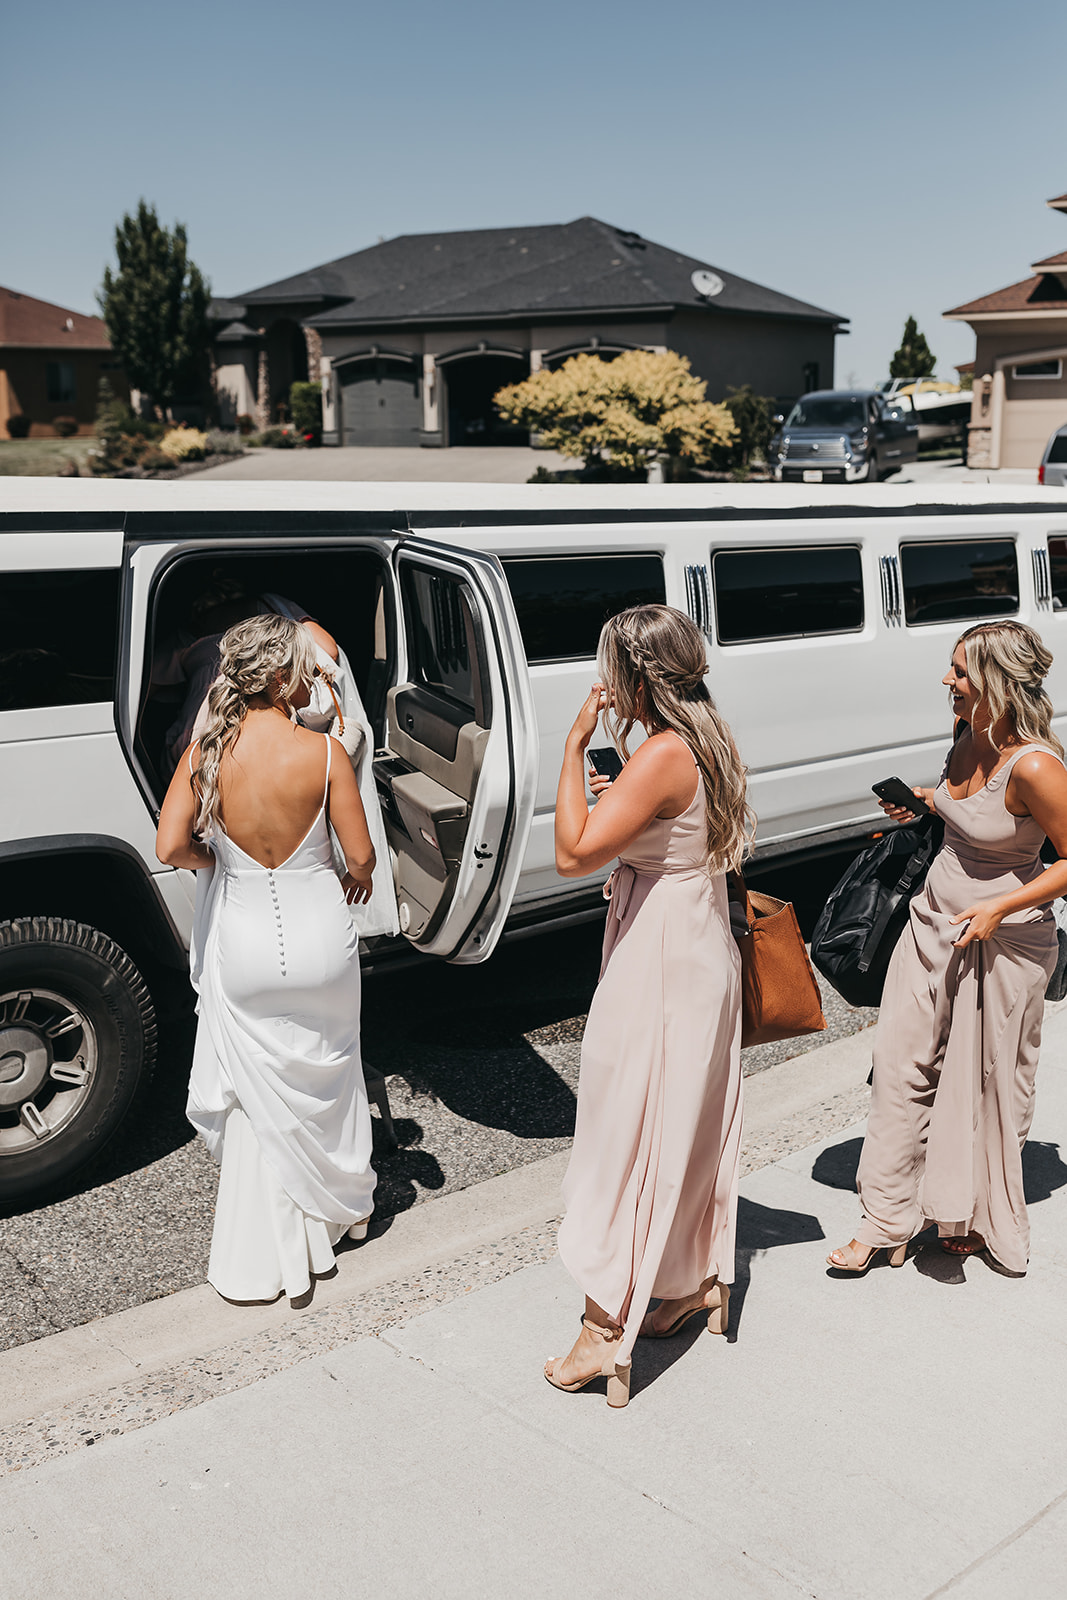 Bride and bridesmaids getting in limo to ride to Cooper Wine Company winery in Washington for wedding ceremony